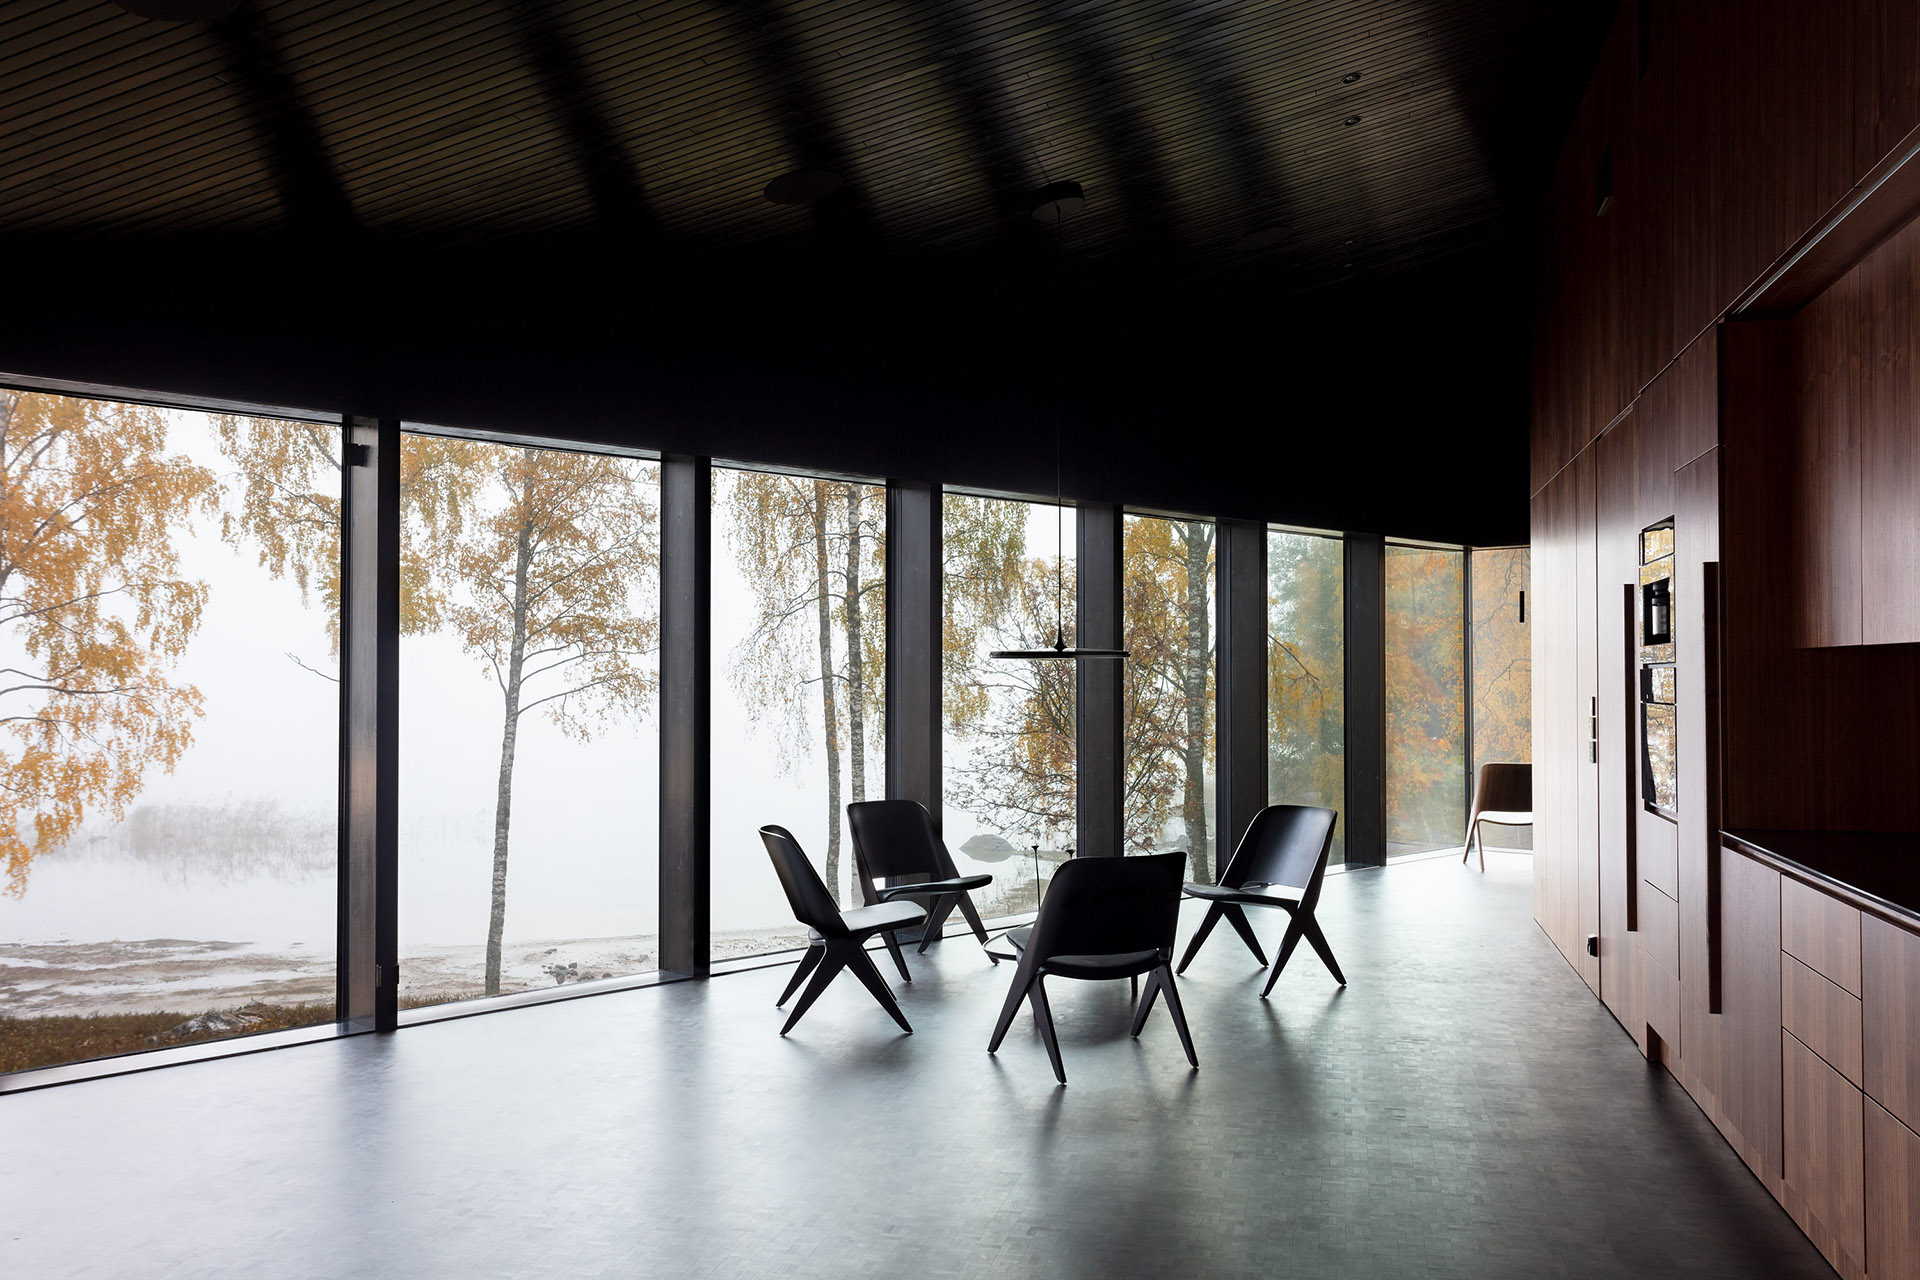 Pine and birch forests and views of the lake: the views create harmony in the Square House